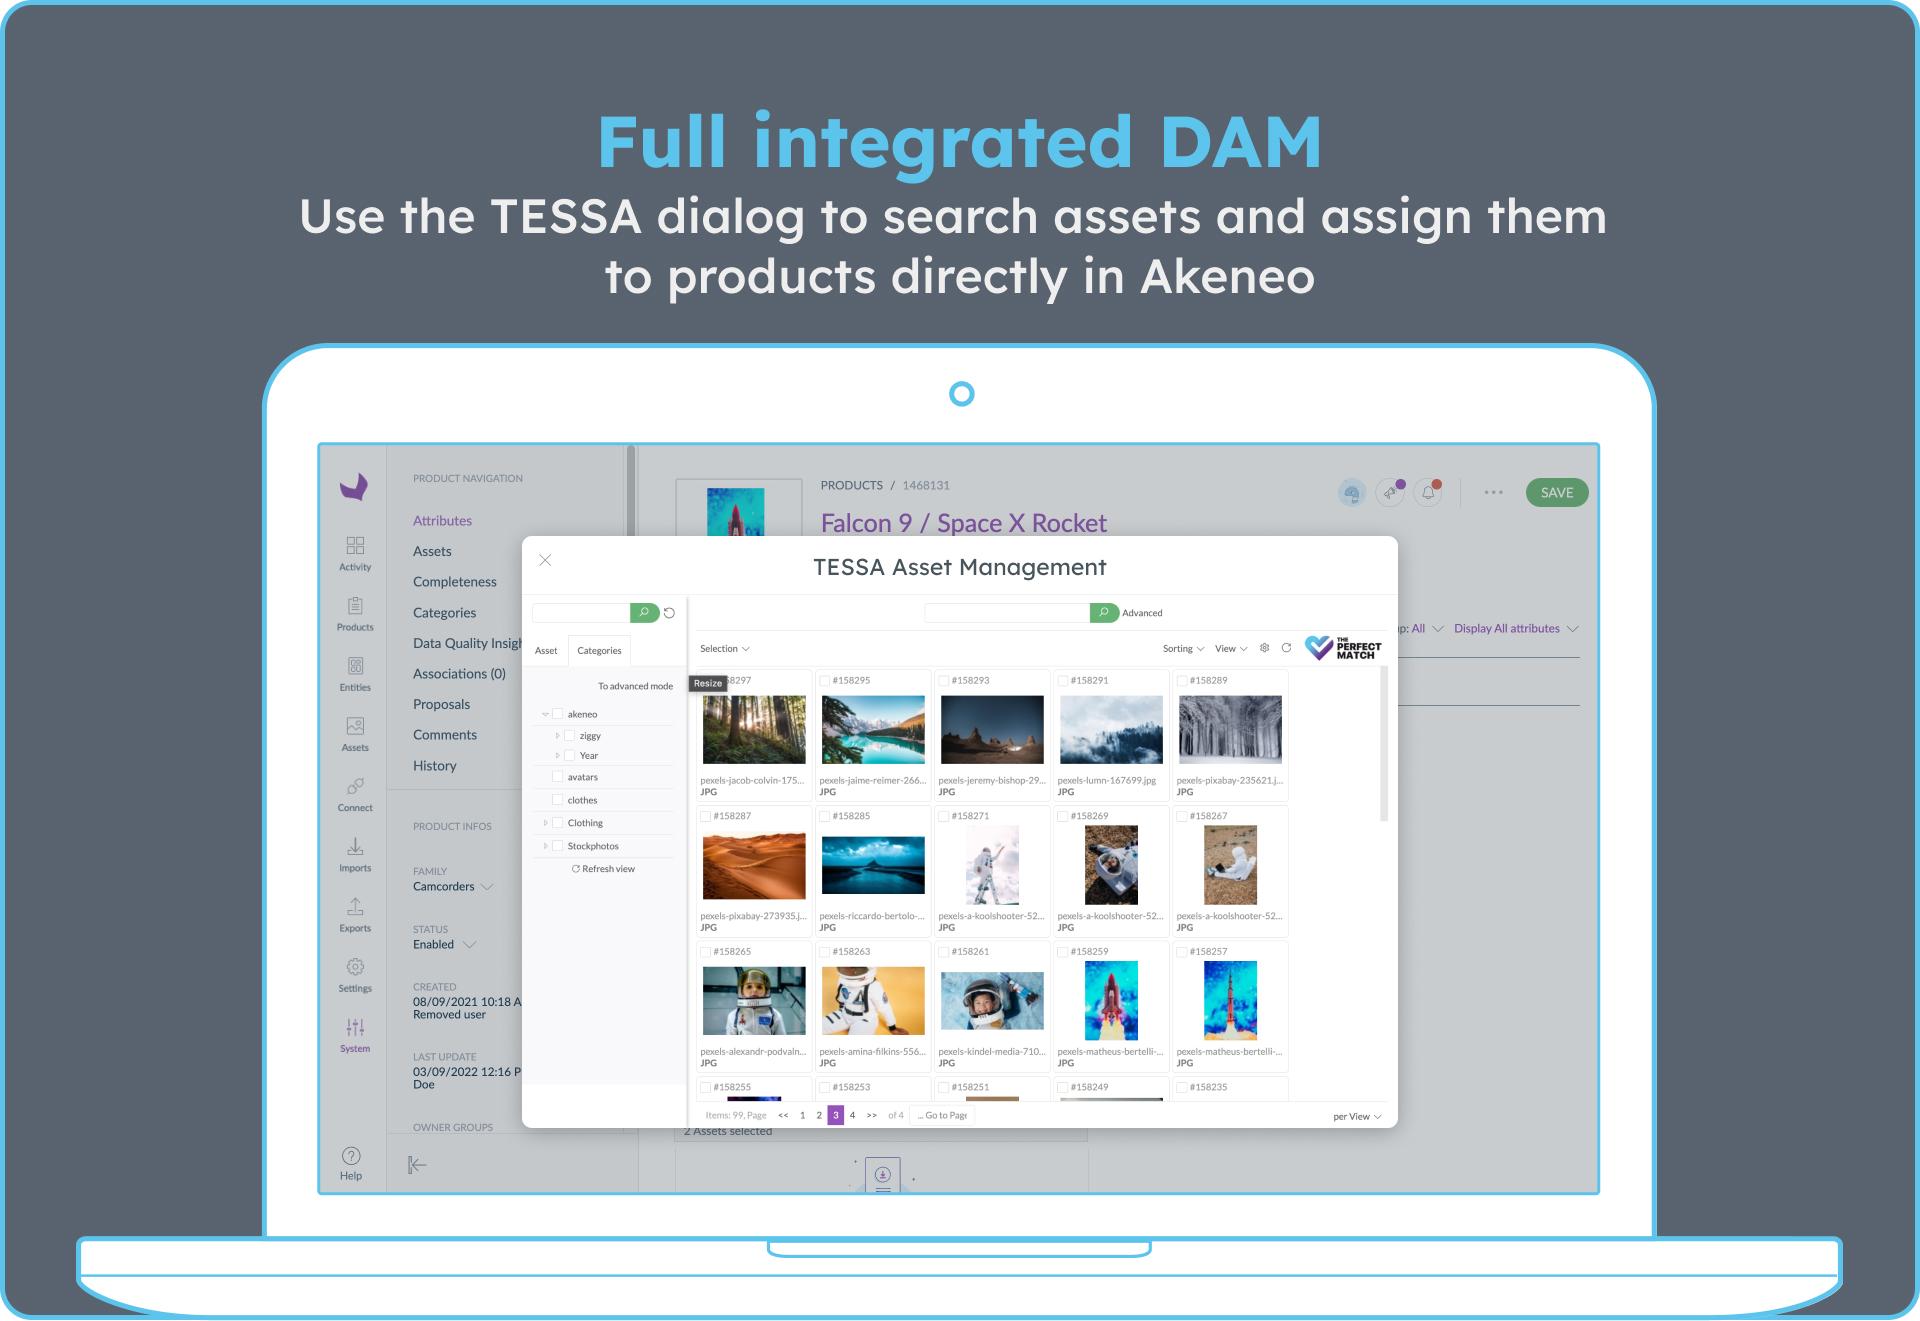 gallery picture : 1-full-integrated-dam.jpg